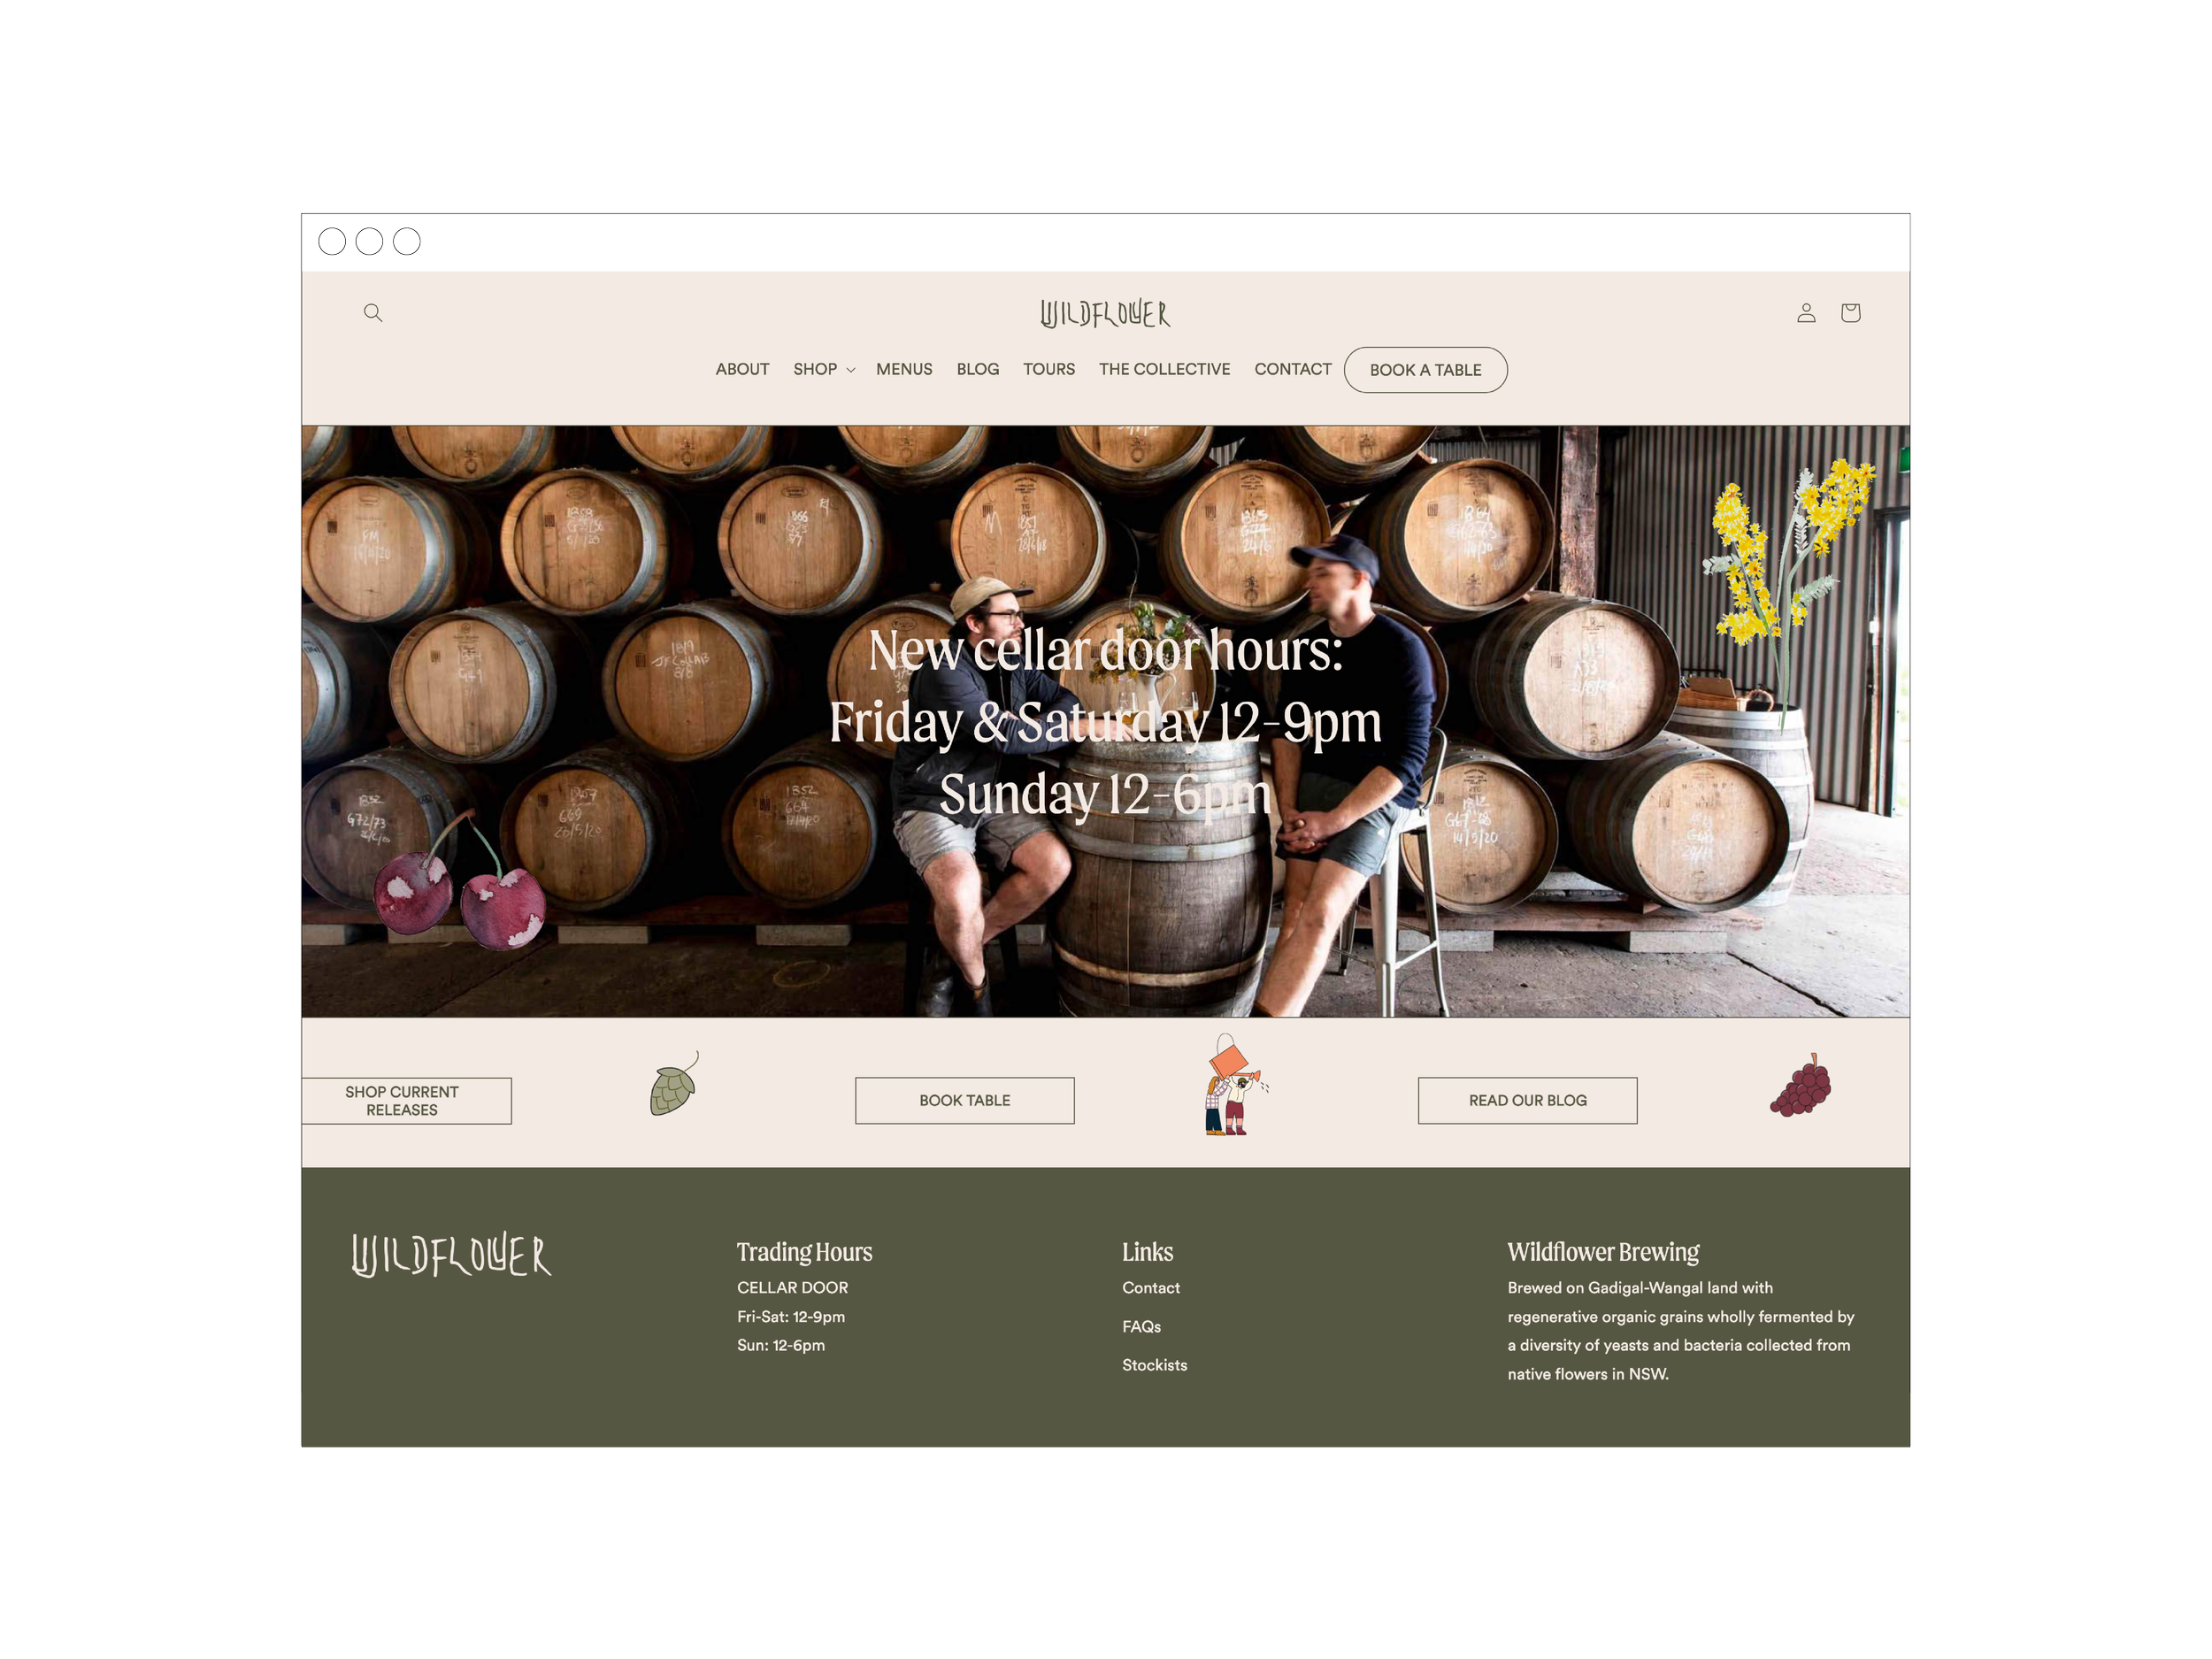 SoftLaunch-Web-Design-Wildflower-Brewery-02.png